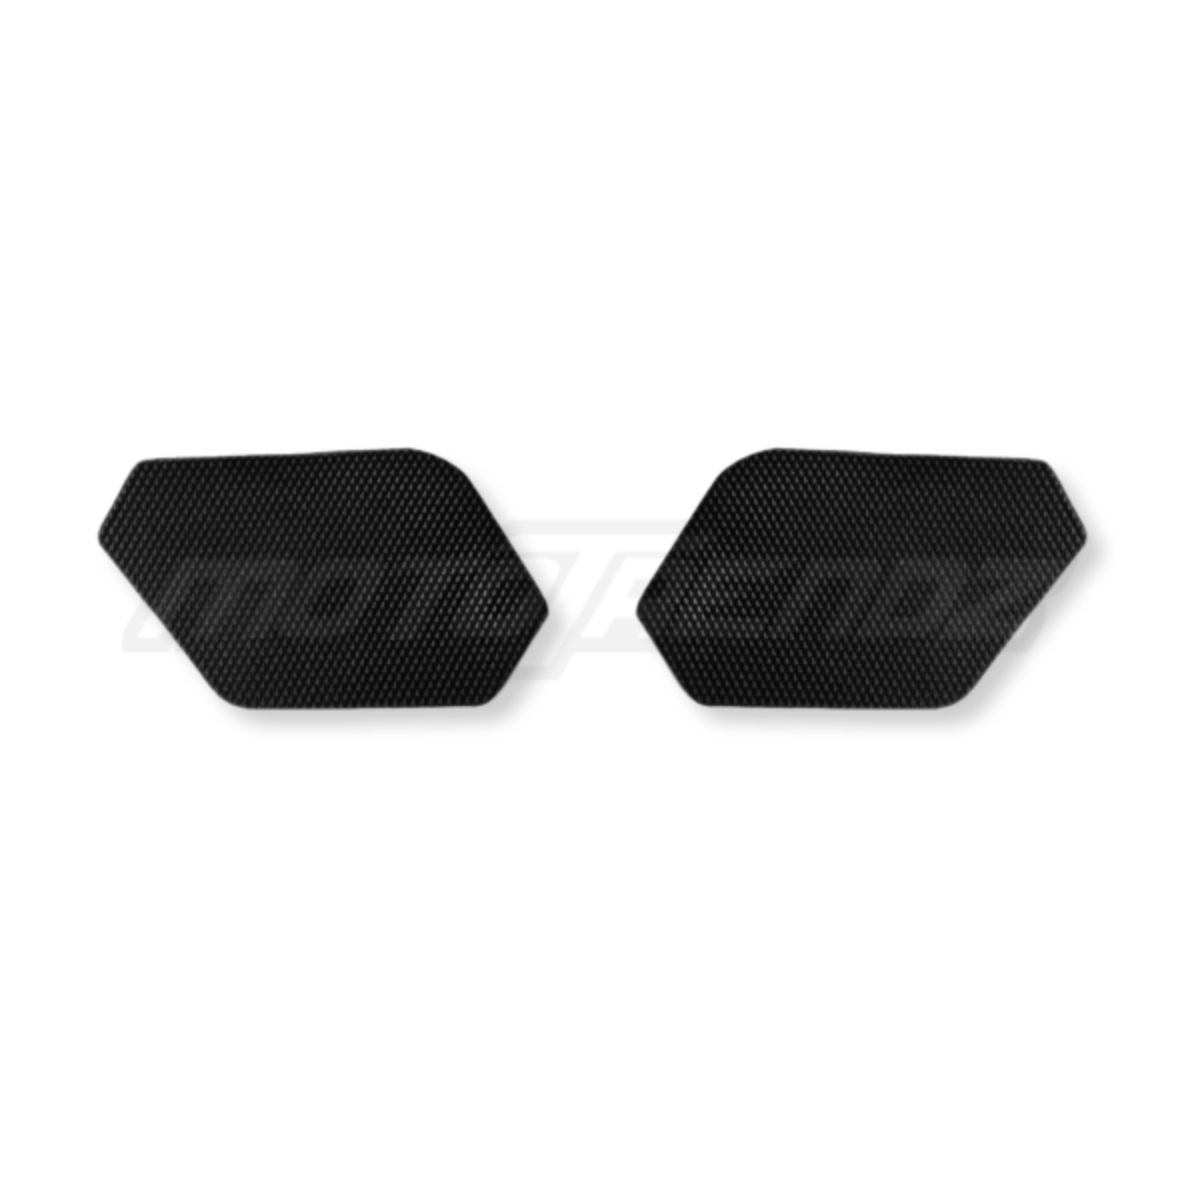 Traction Pads for Yamaha R15 V4/R15 M 4